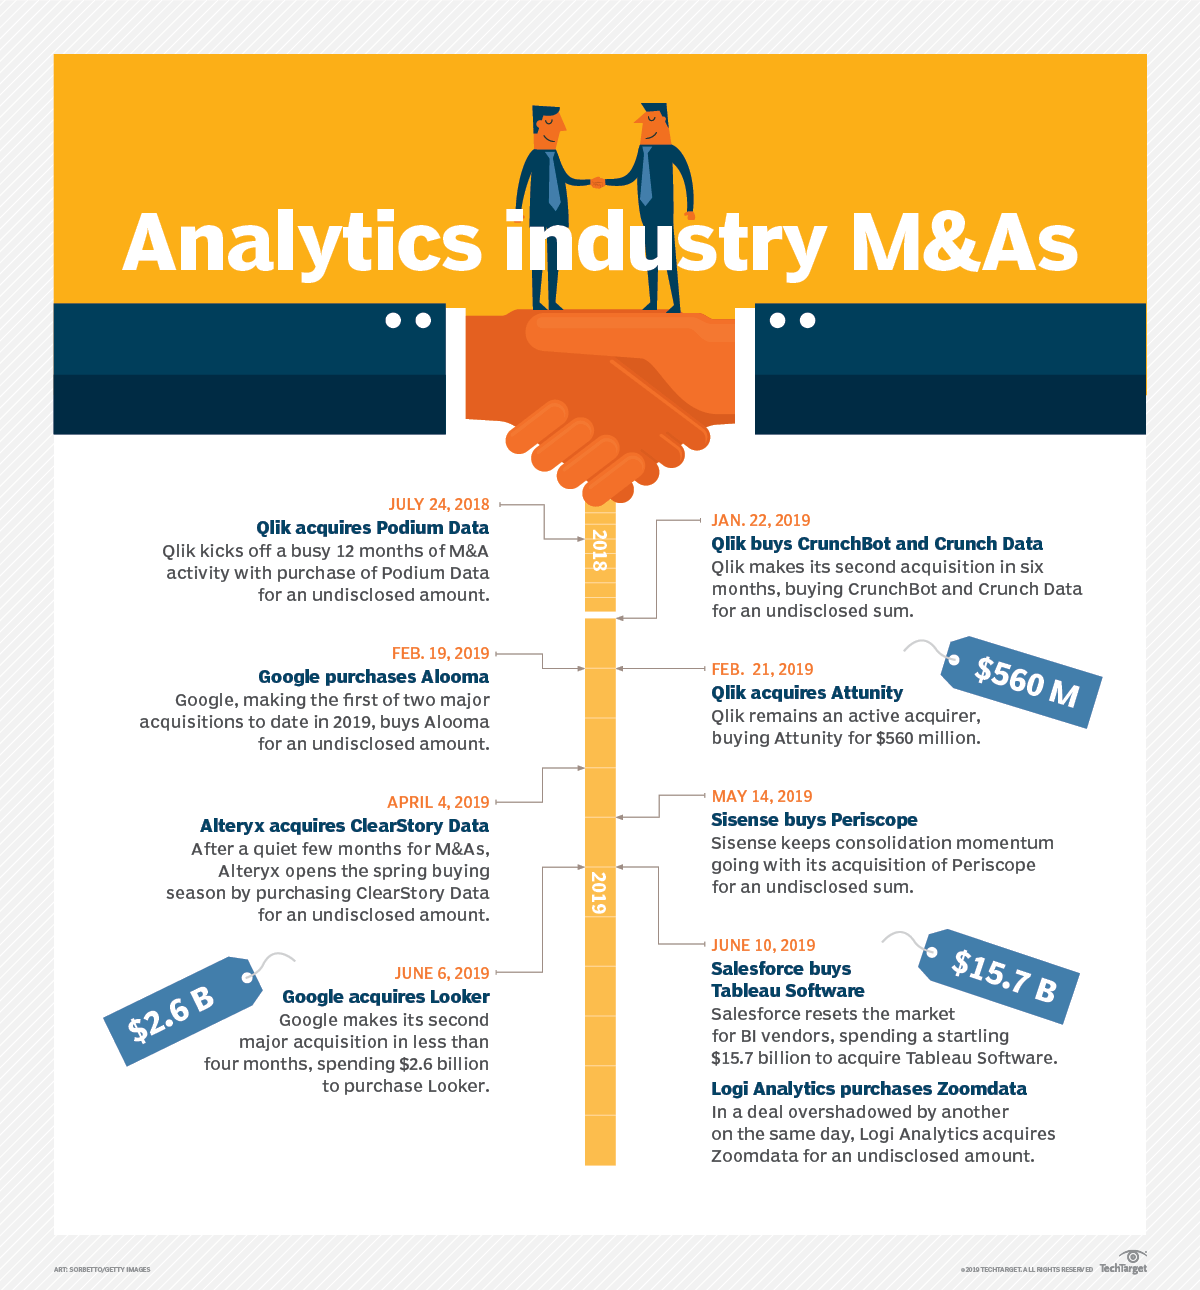 Analytics industry M&As